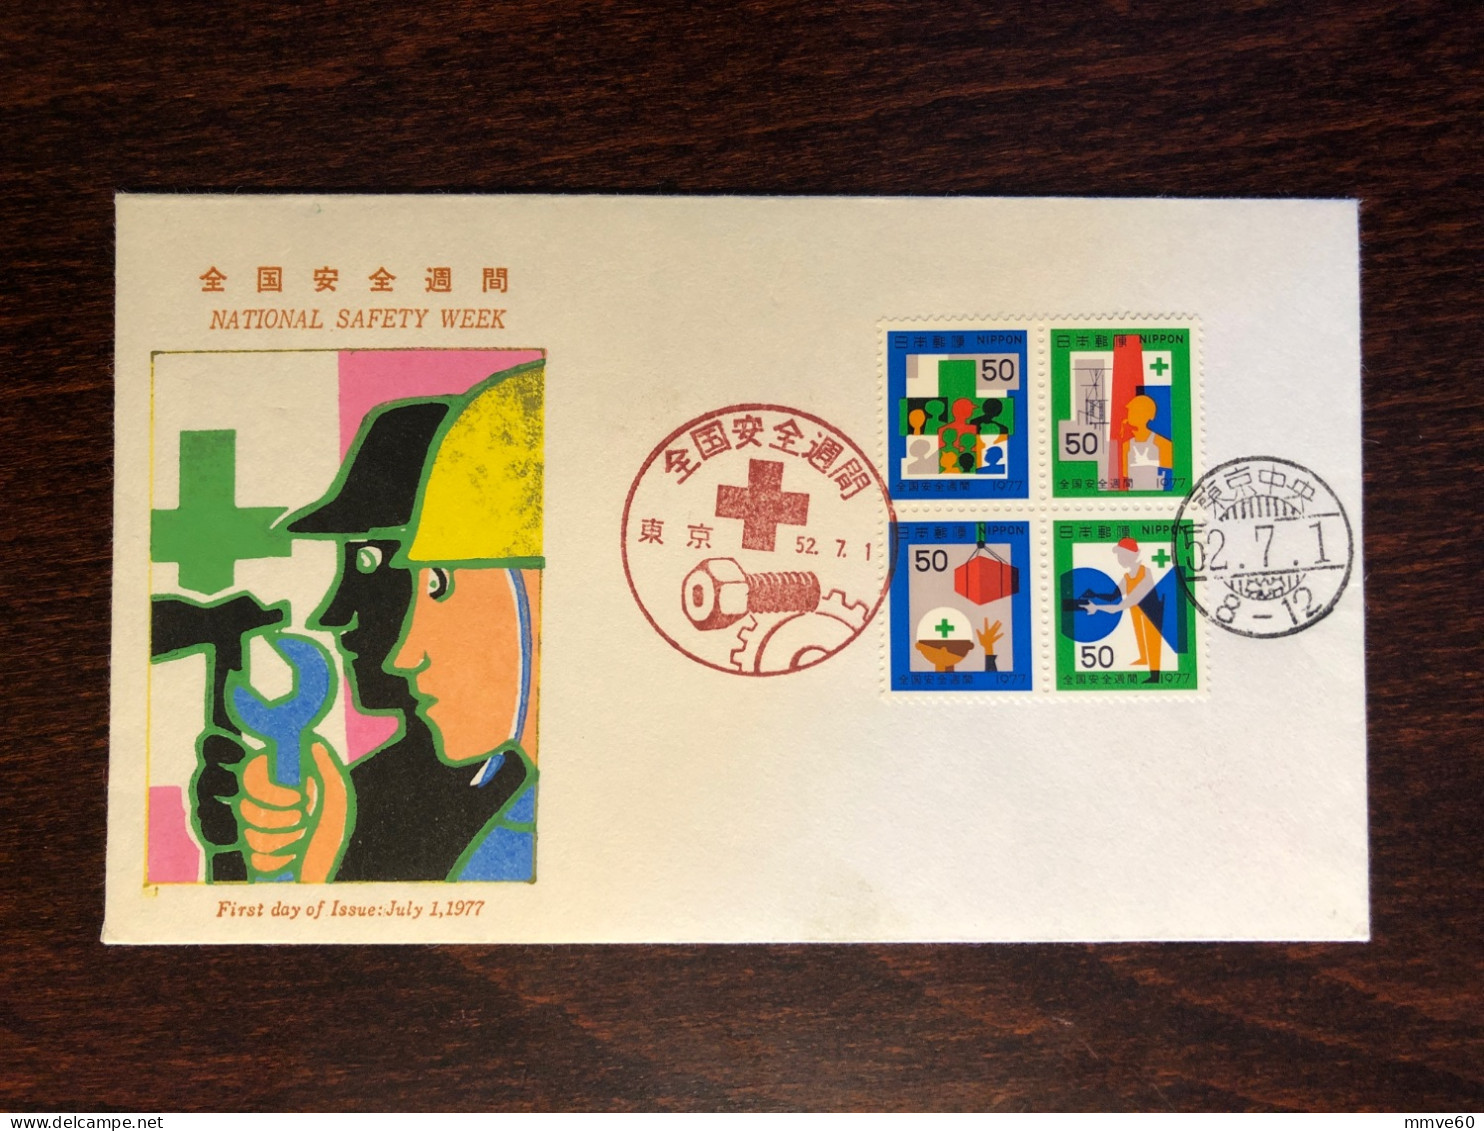 JAPAN FDC COVER 1977 YEAR RED CROSS HEALTH MEDICINE STAMPS - FDC